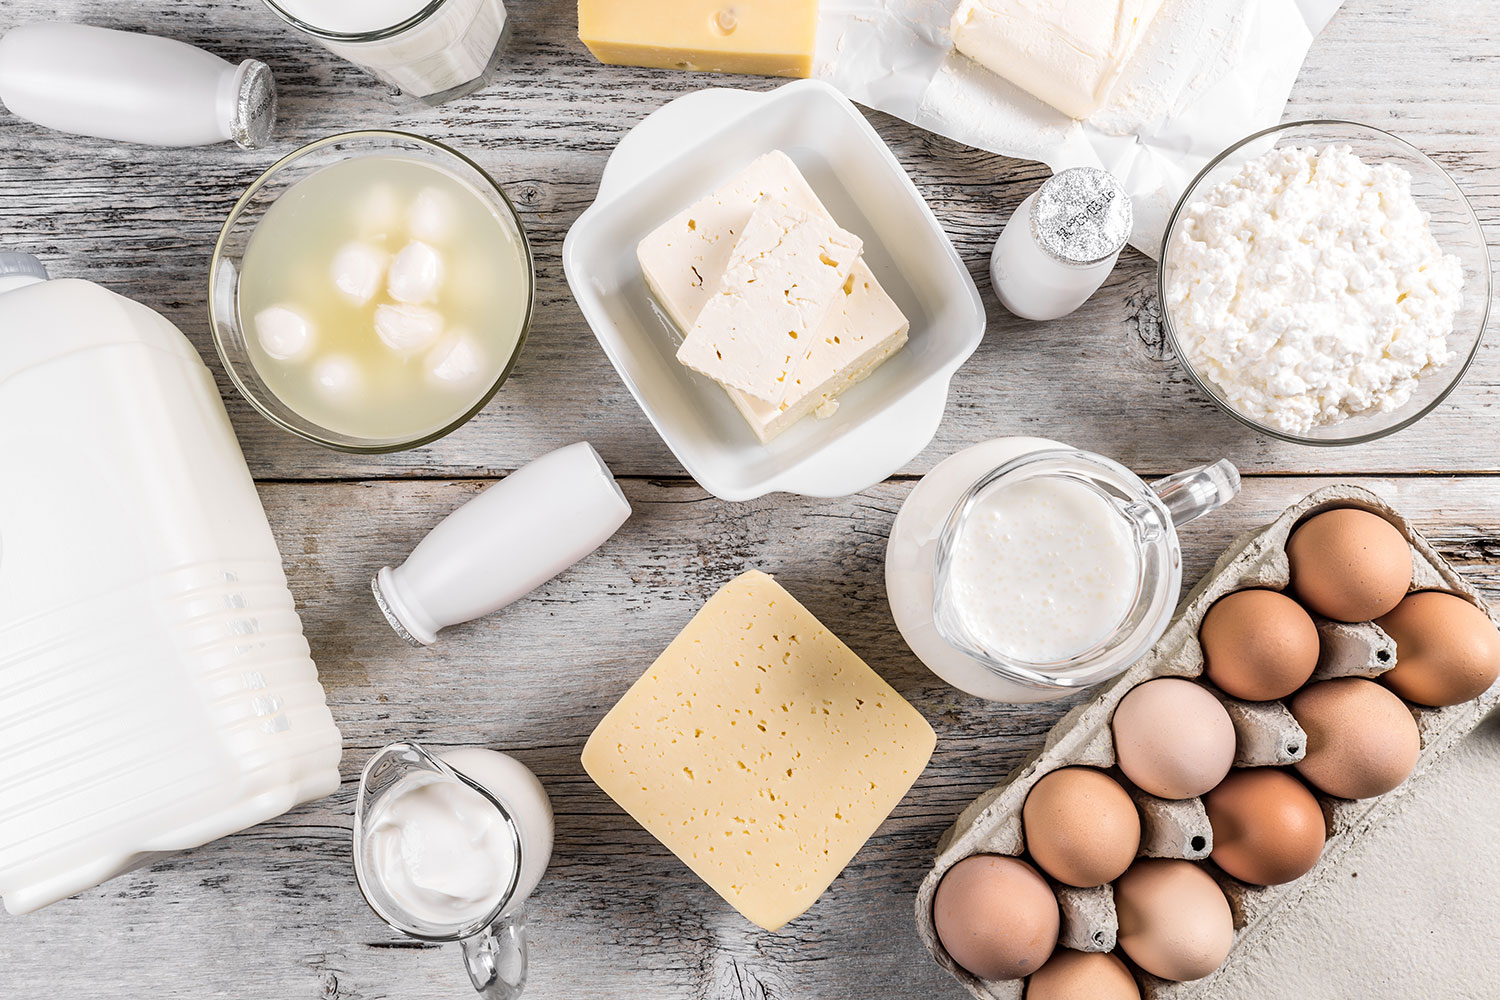 The Hardest Trivia Quiz You’ll Ever Take (Unless You Take the Easy Way Out) Dairy products